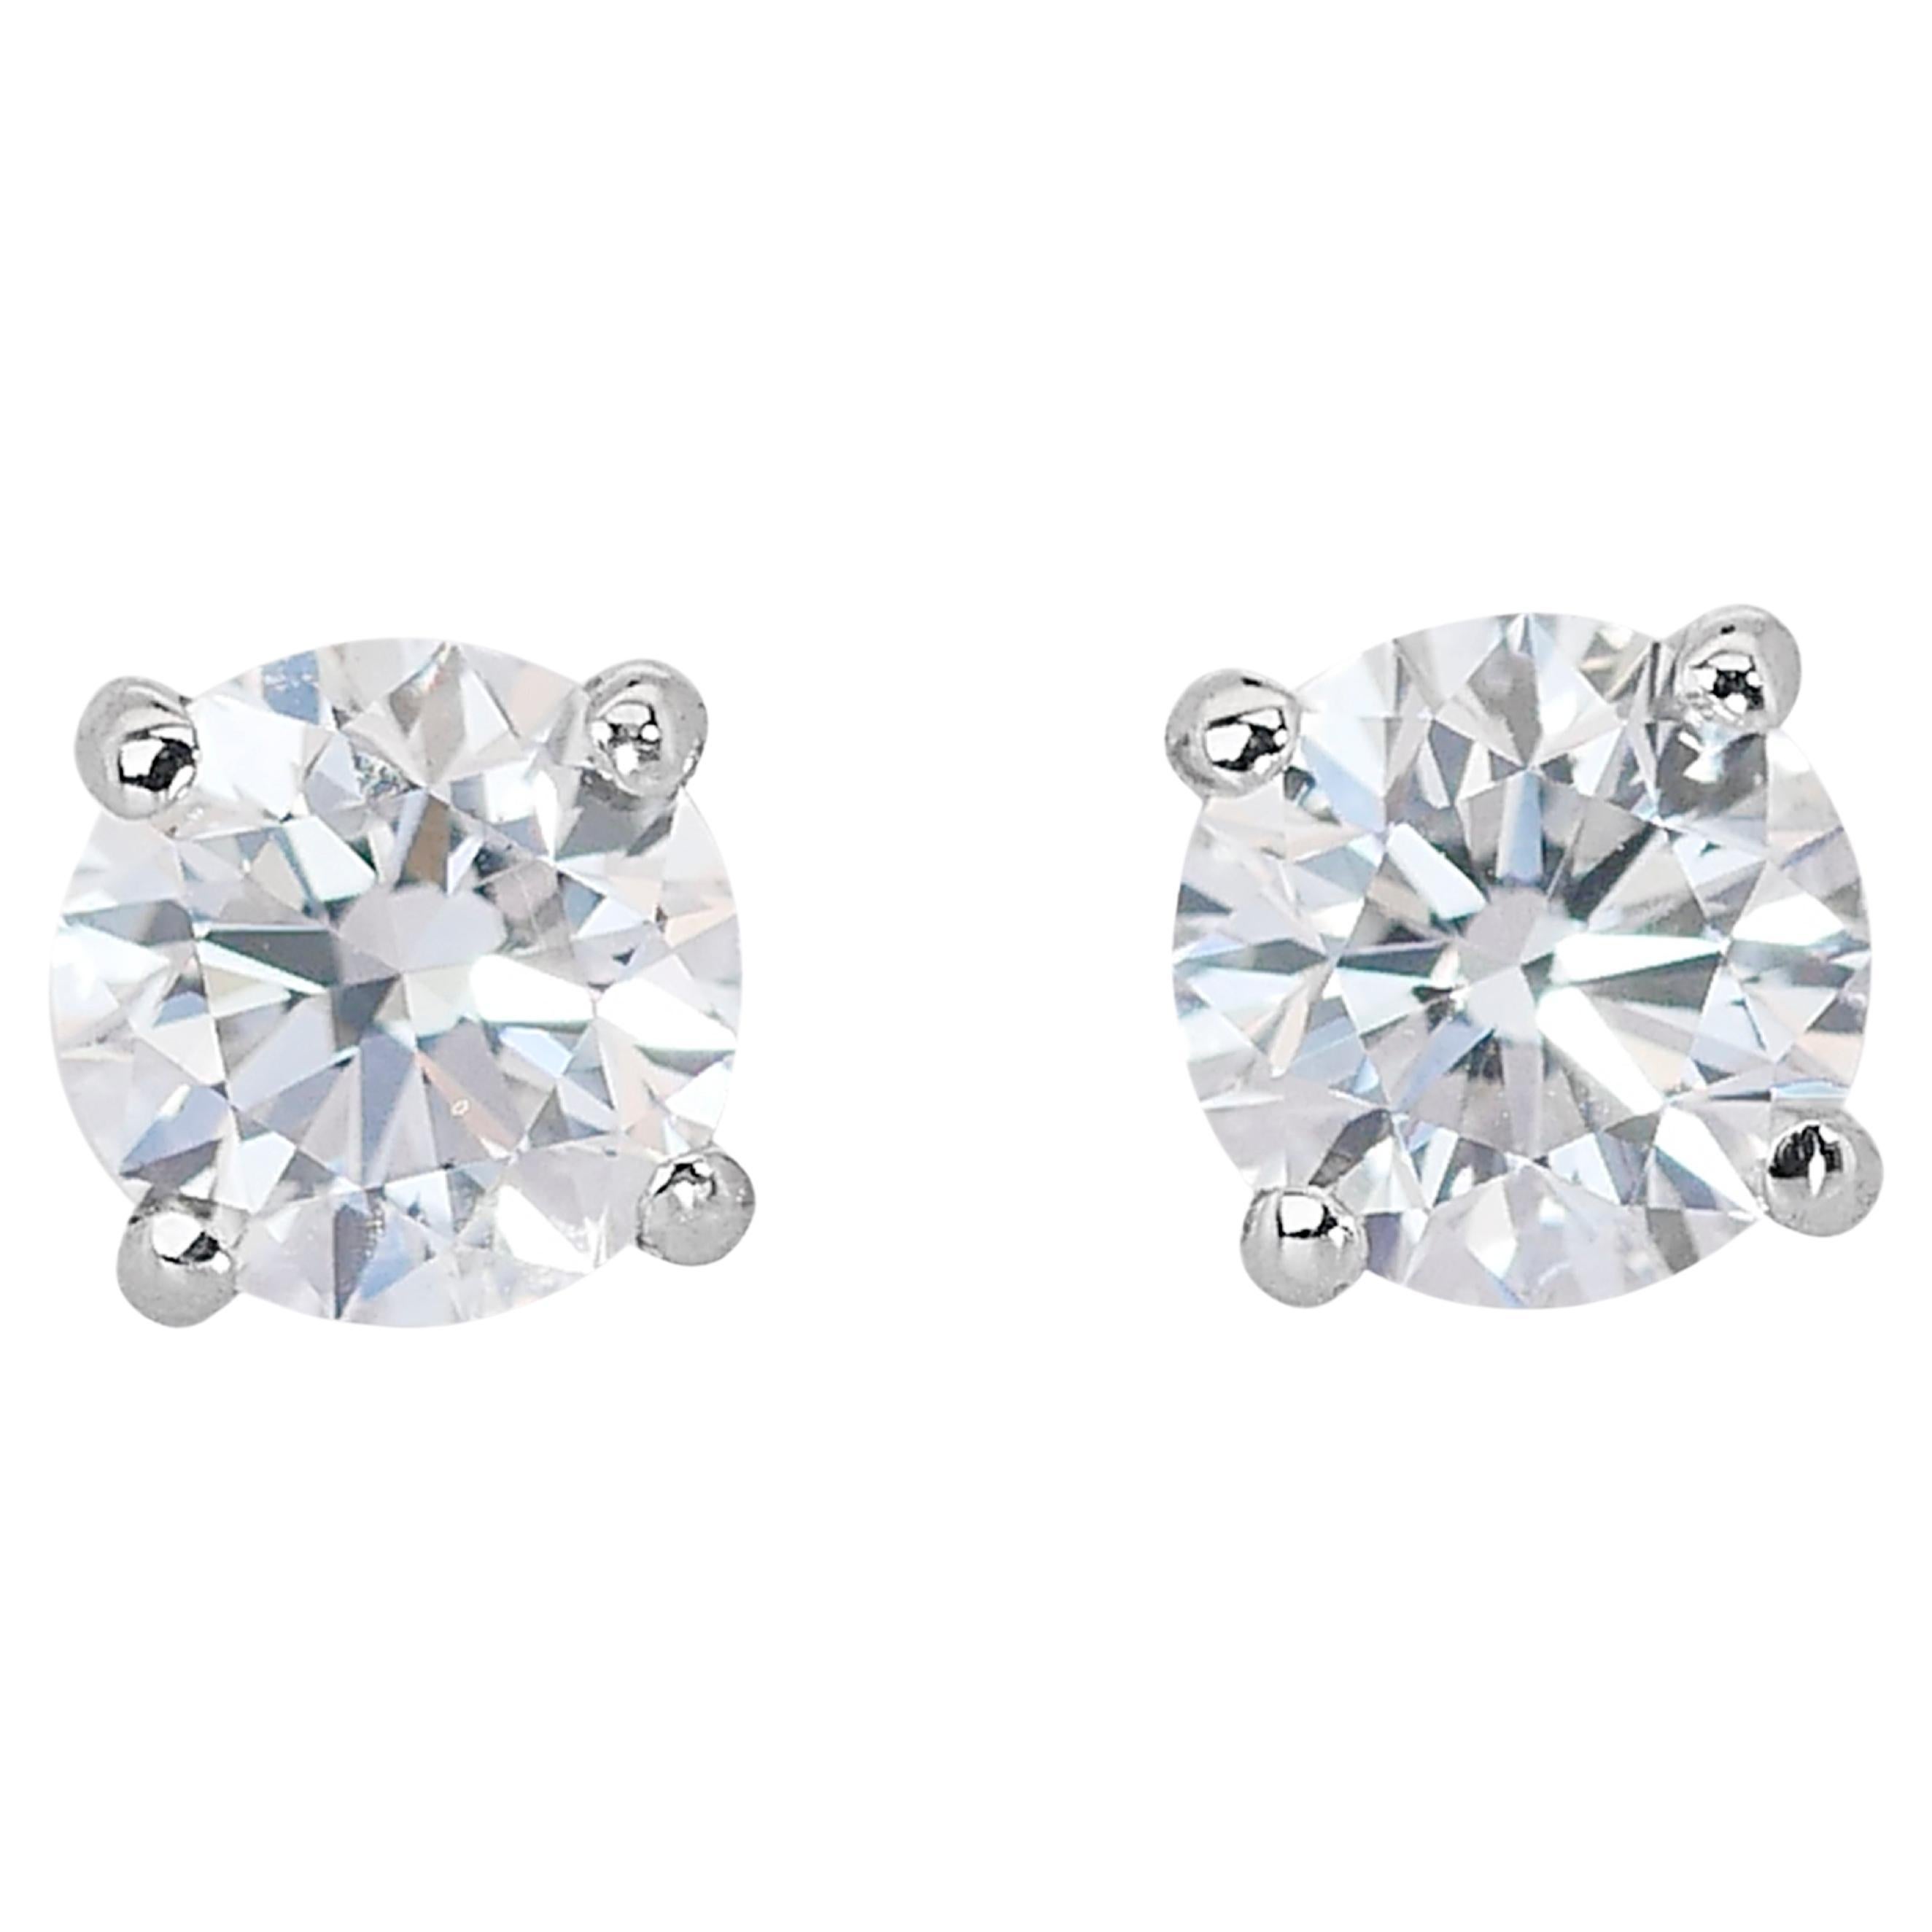 Gleaming 18K White Gold Diamond Stud Earrings with 1.8ct- GIA Certified